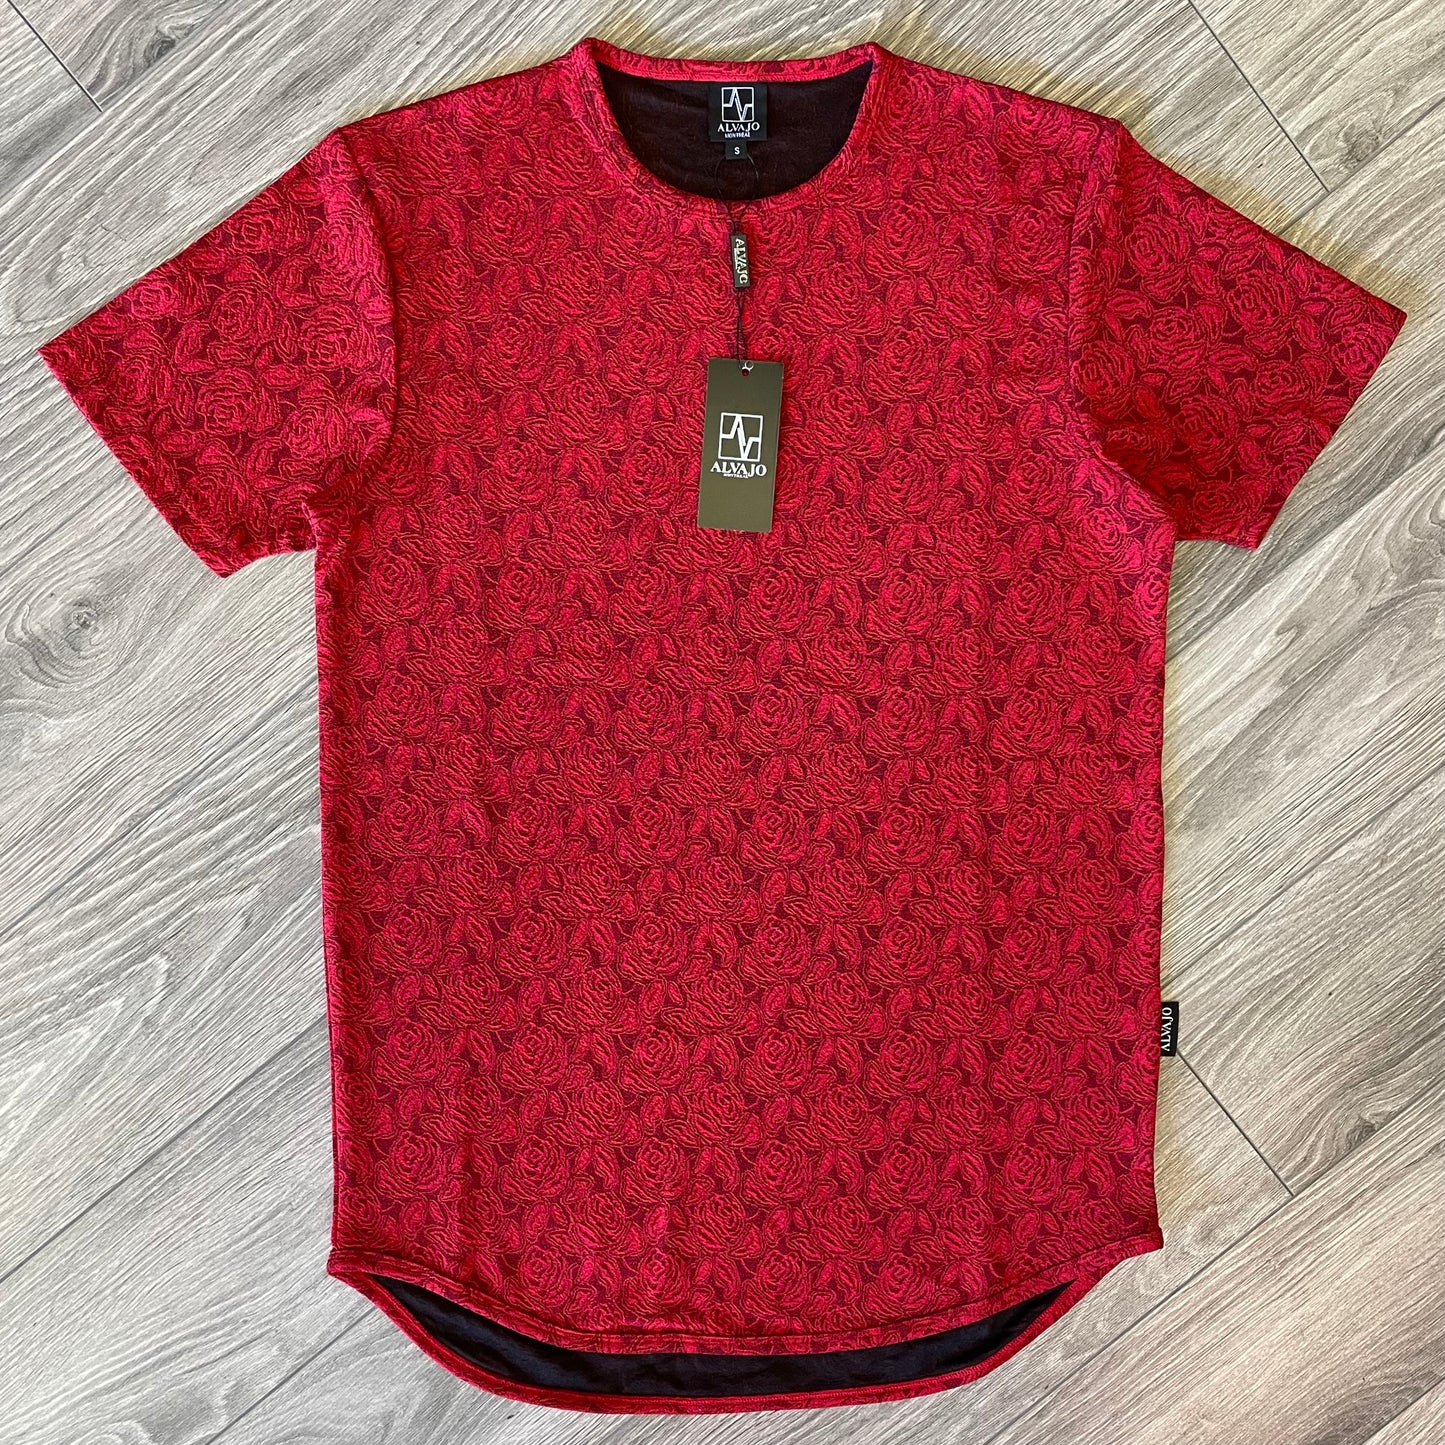 Red Roses Tee